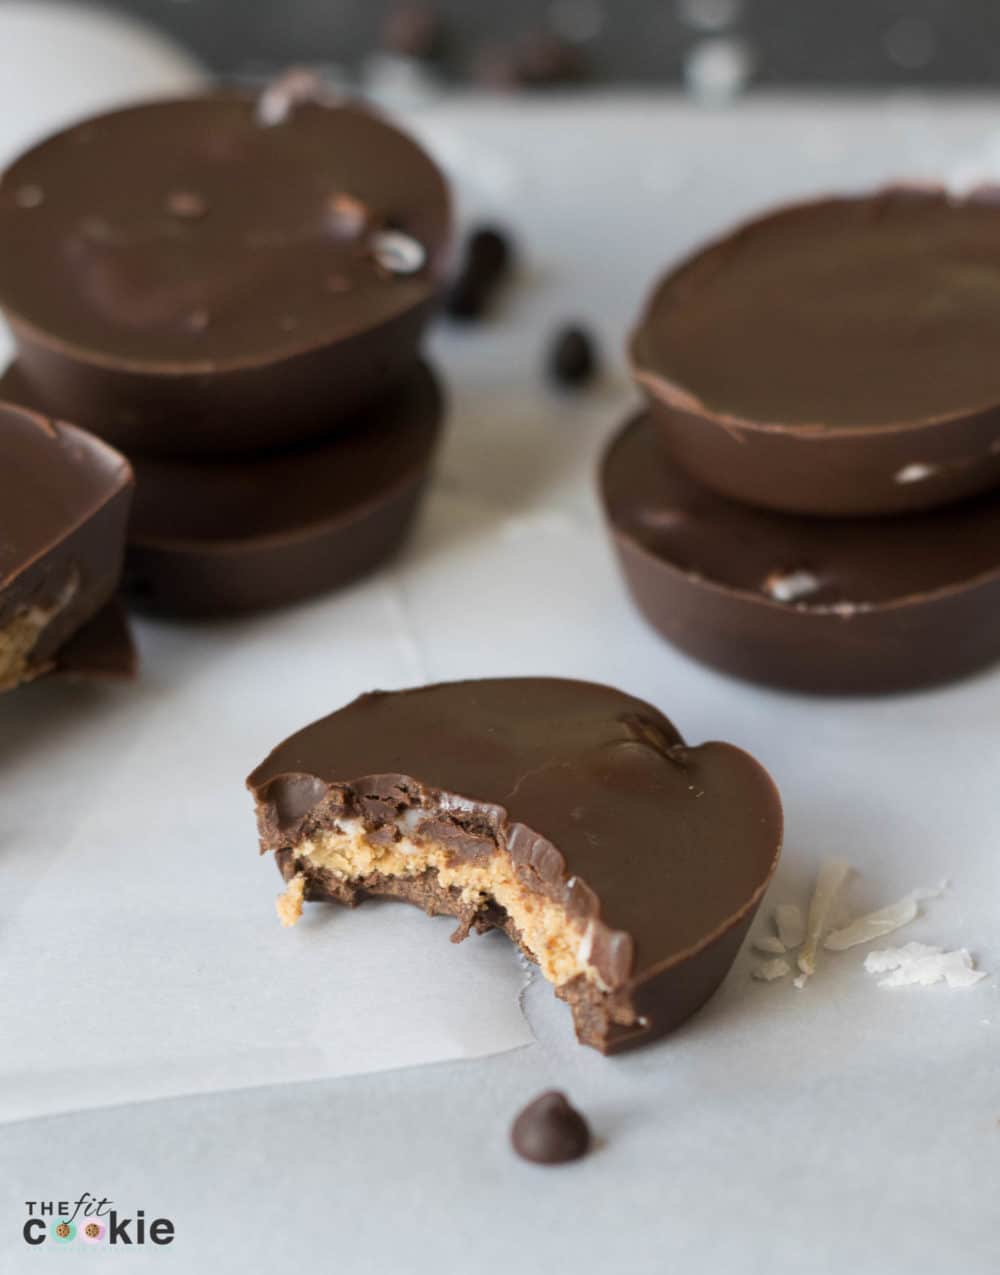 Crush cravings the healthy way! Cheer Up Almond Butter Cup recipe from The Sexyfit Method book (gluten free, vegan, and peanut free) - @TheFitCookie #healthy